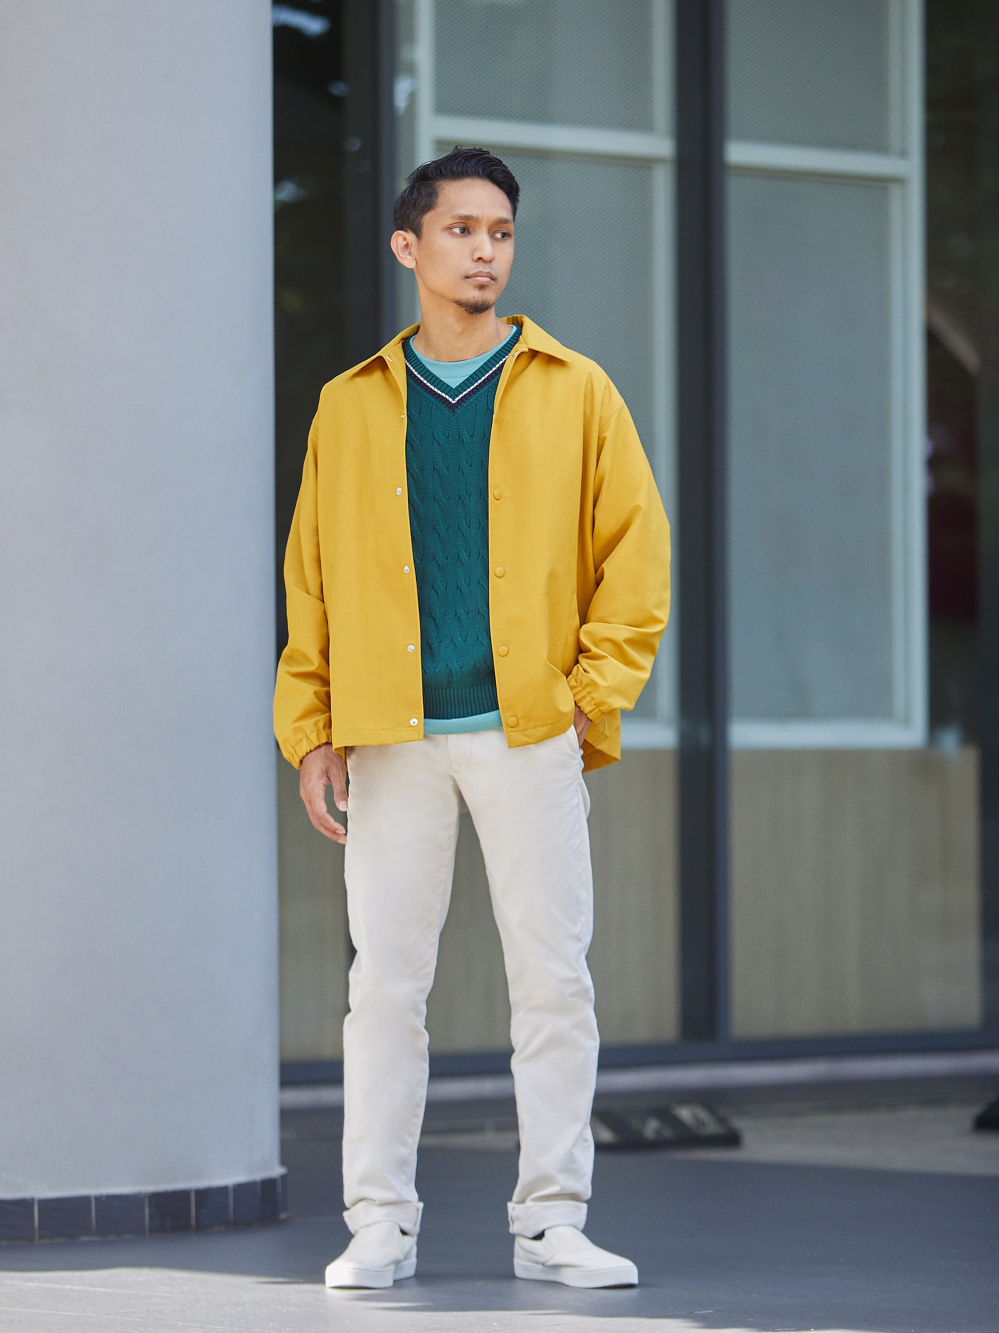 Check styling ideas for「SLIM FIT CHINO PANTS」